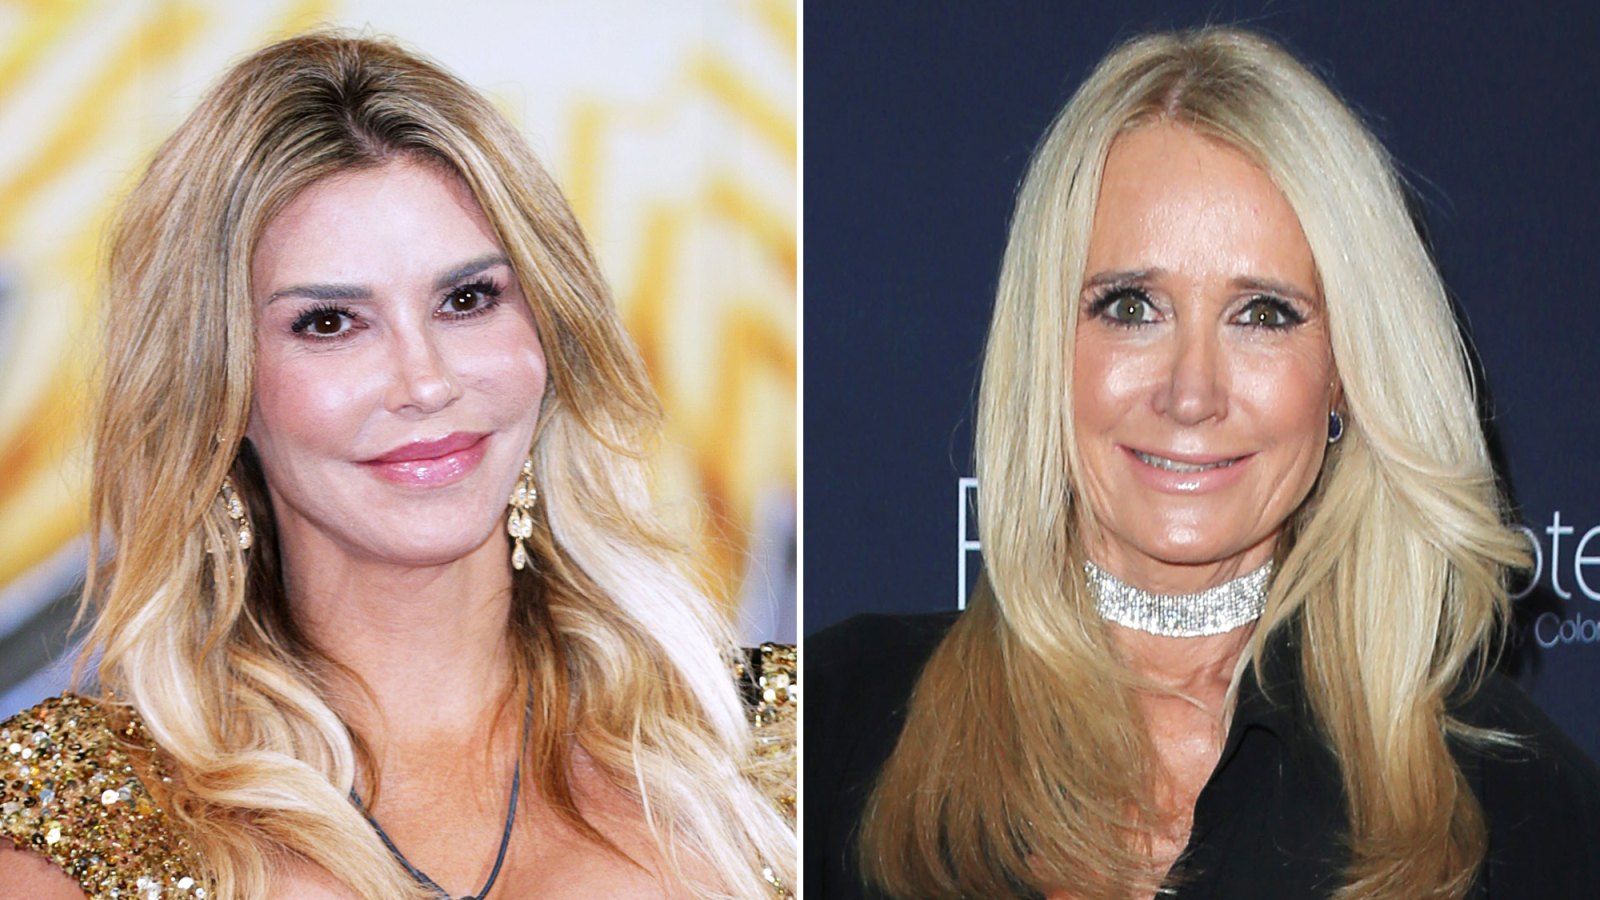 Brandi Glanville Reveals She Isn't Speaking to 'Real Housewives of Beverly Hills' Costar Kim Richards After 'Hot Tub Fight'